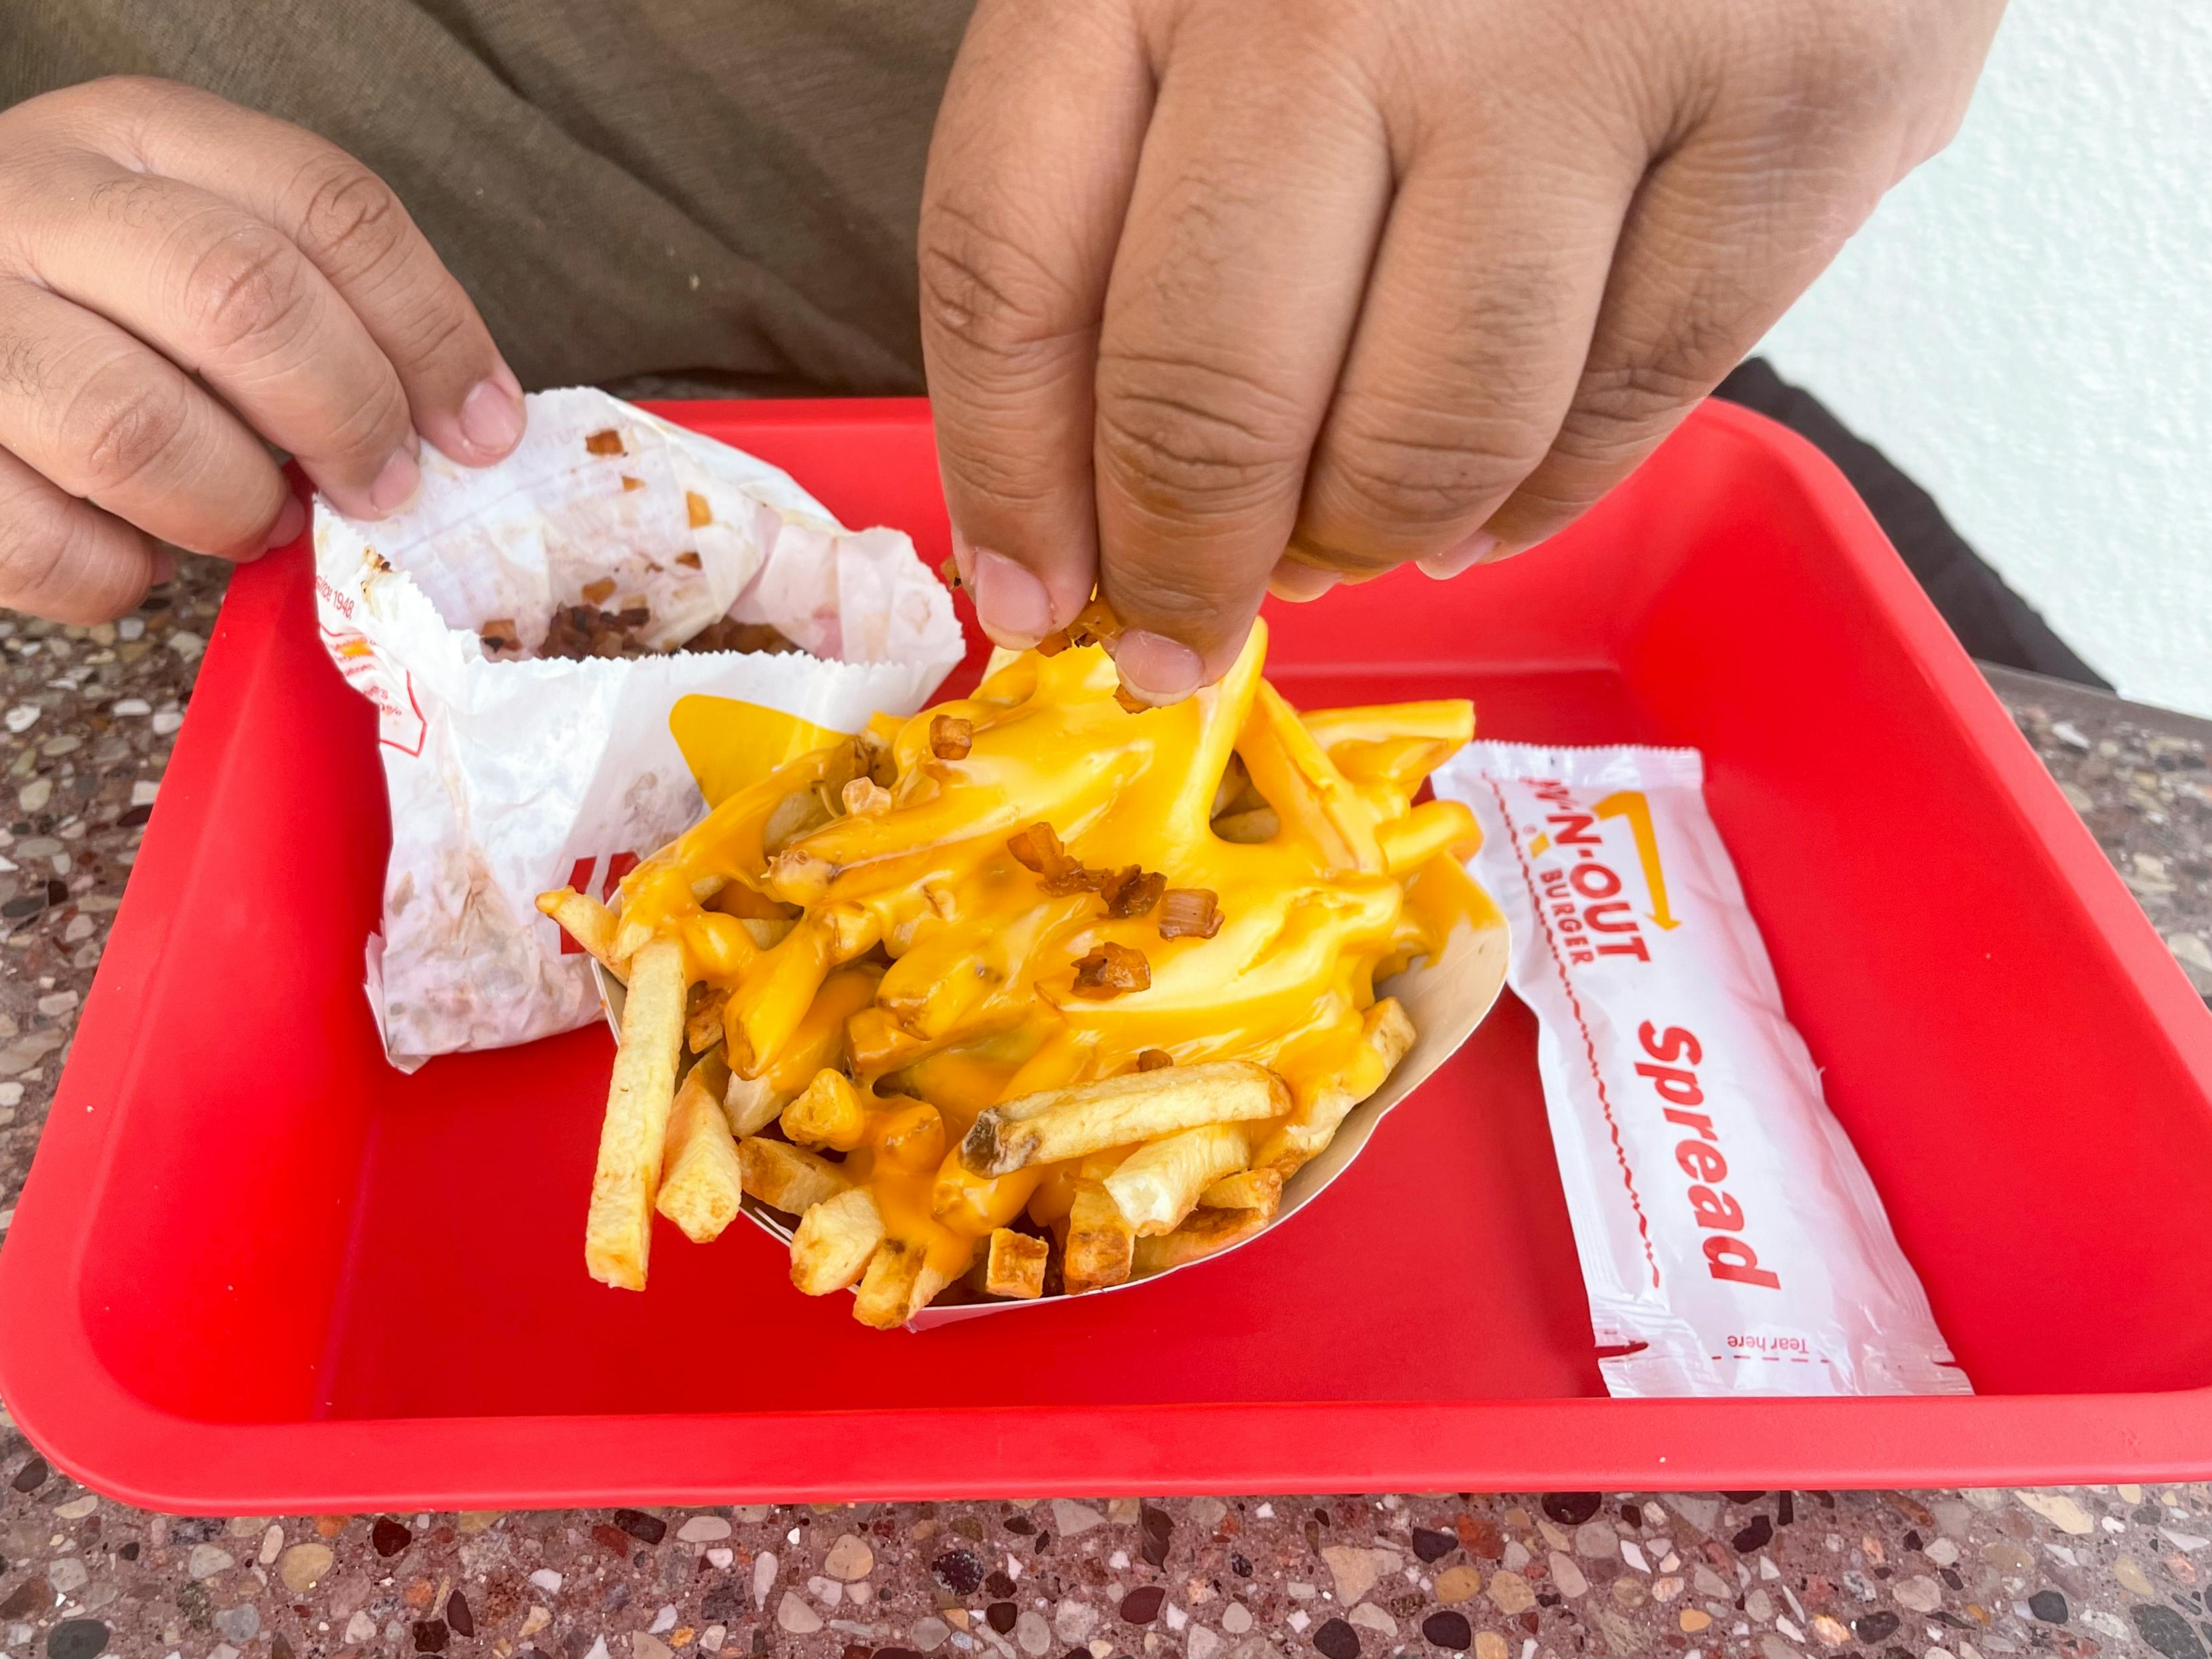 In-N-Out Burger Secret Menu & Ways to Save (2022) - The Krazy Coupon Lady